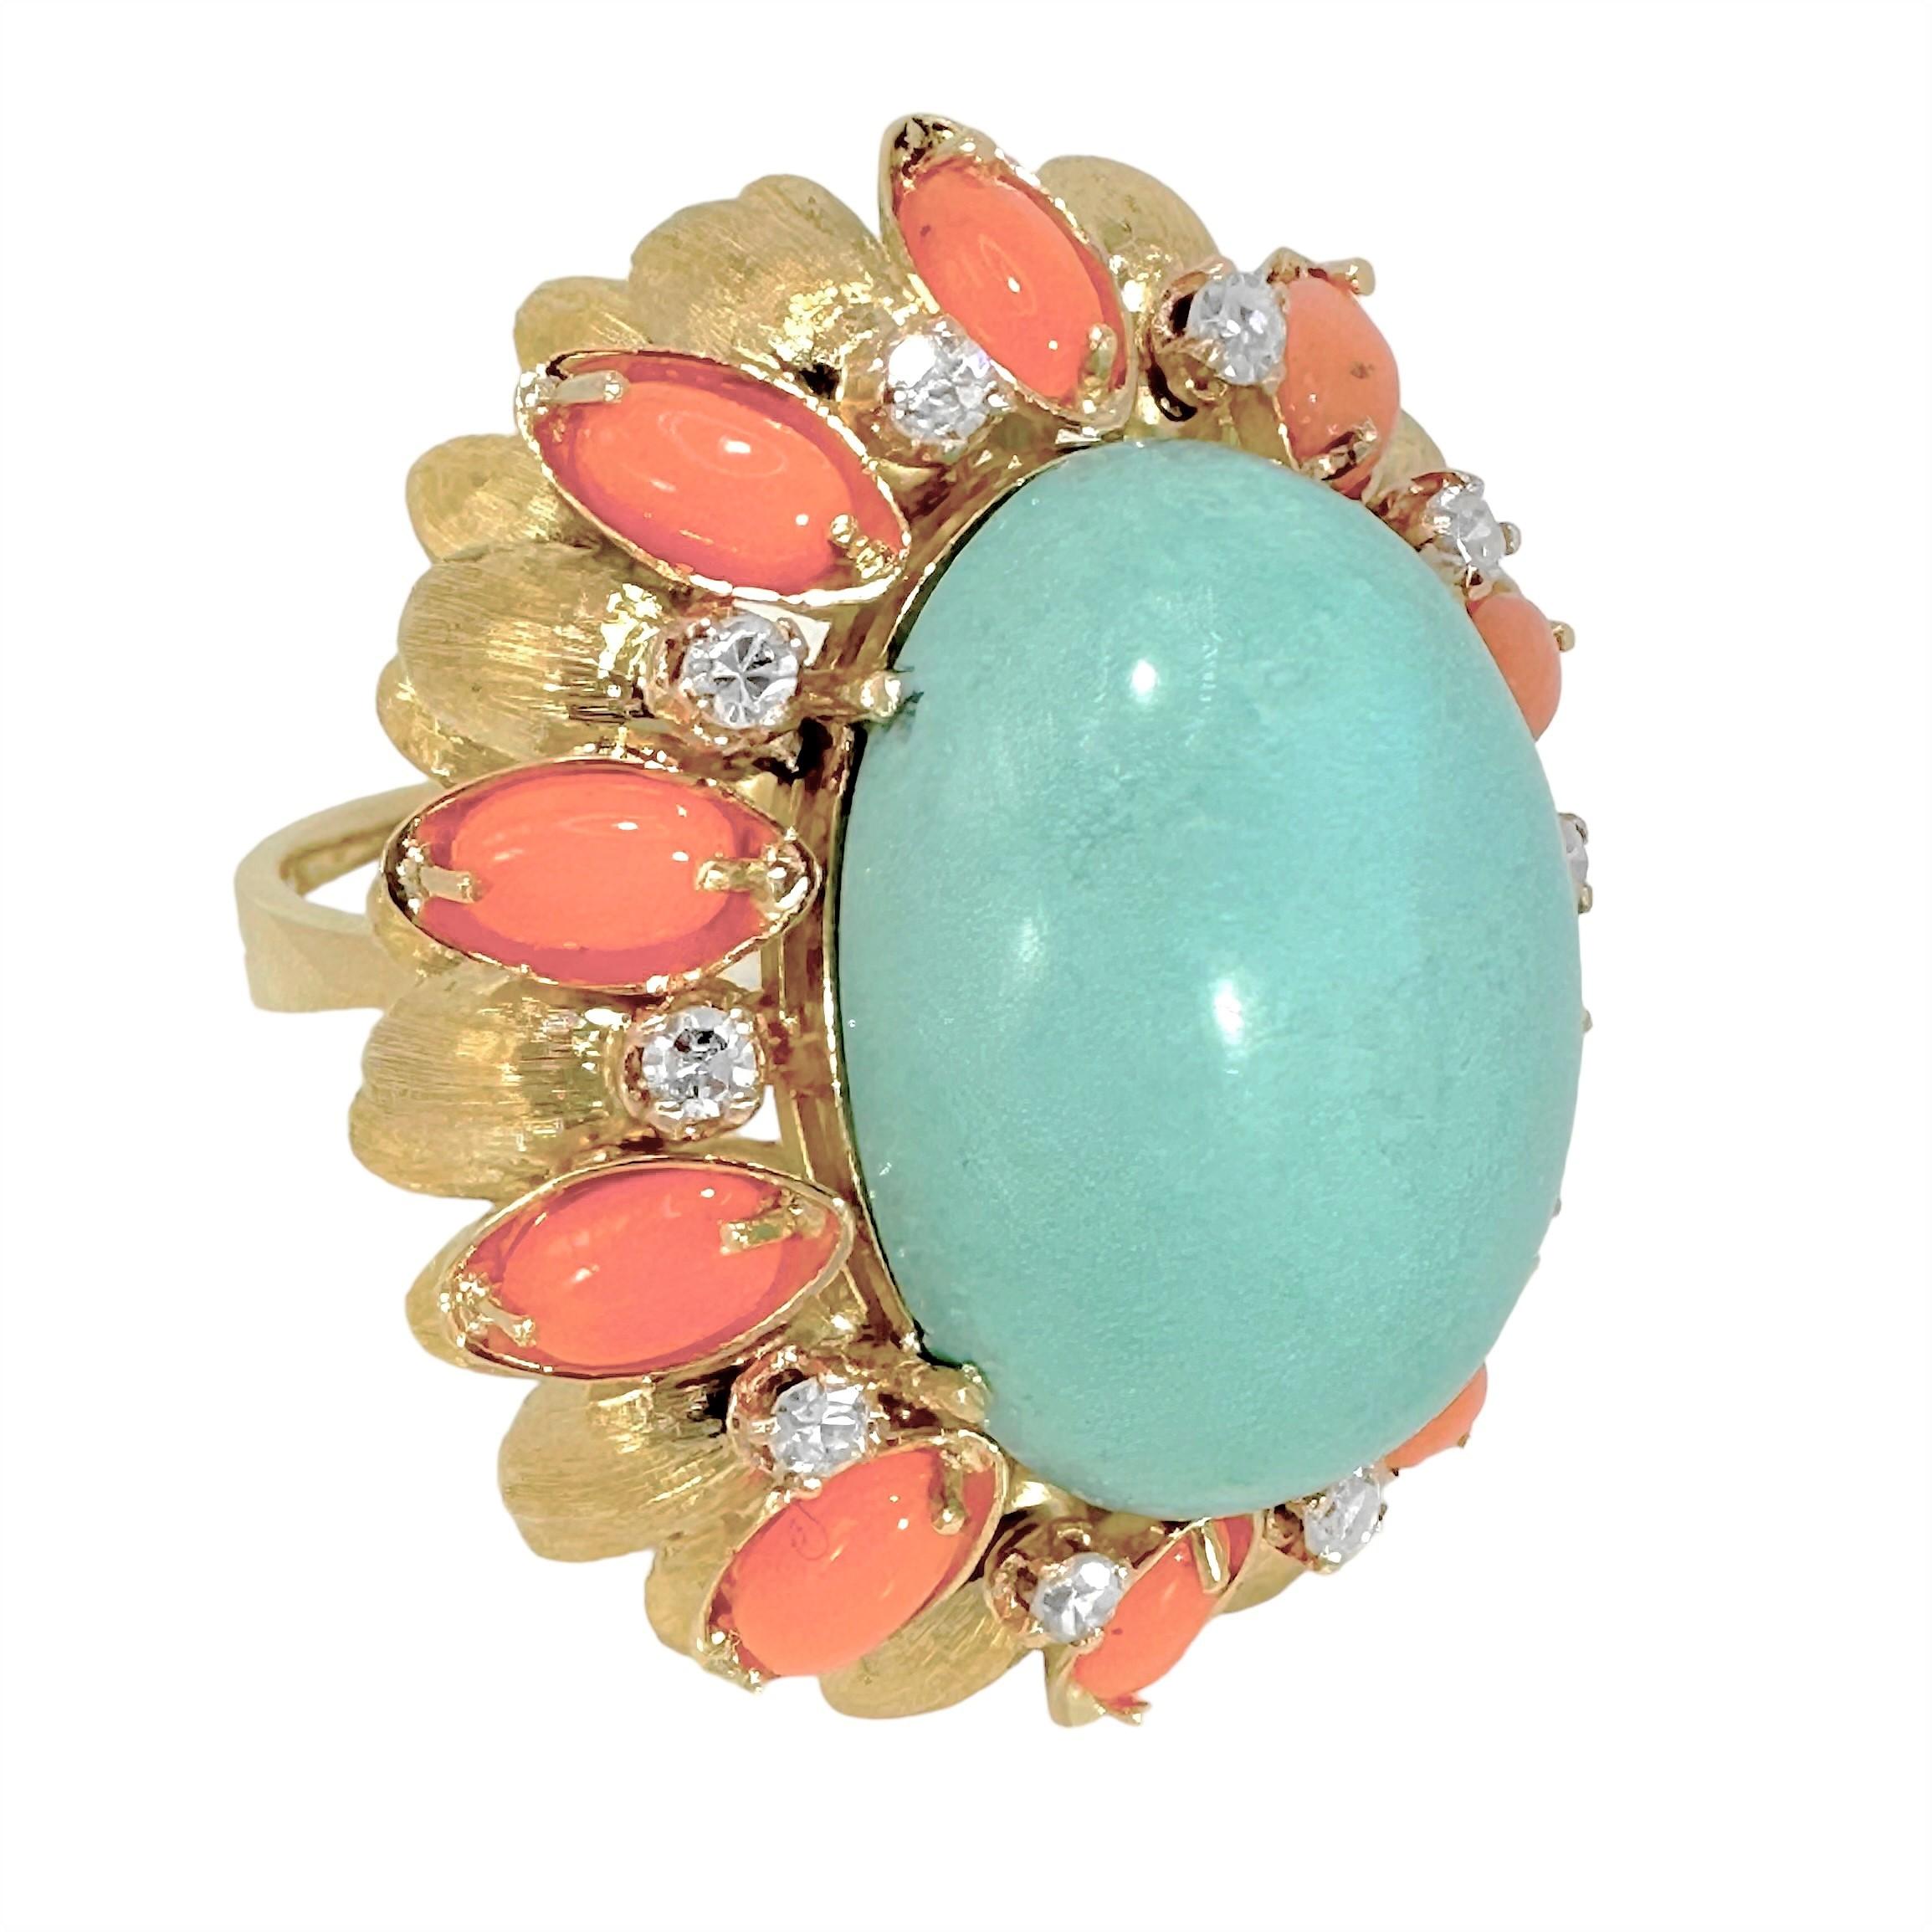 Modern Large Scale Mid-20th Century 18K Yellow Gold, Coral, Turquoise and Diamond Ring